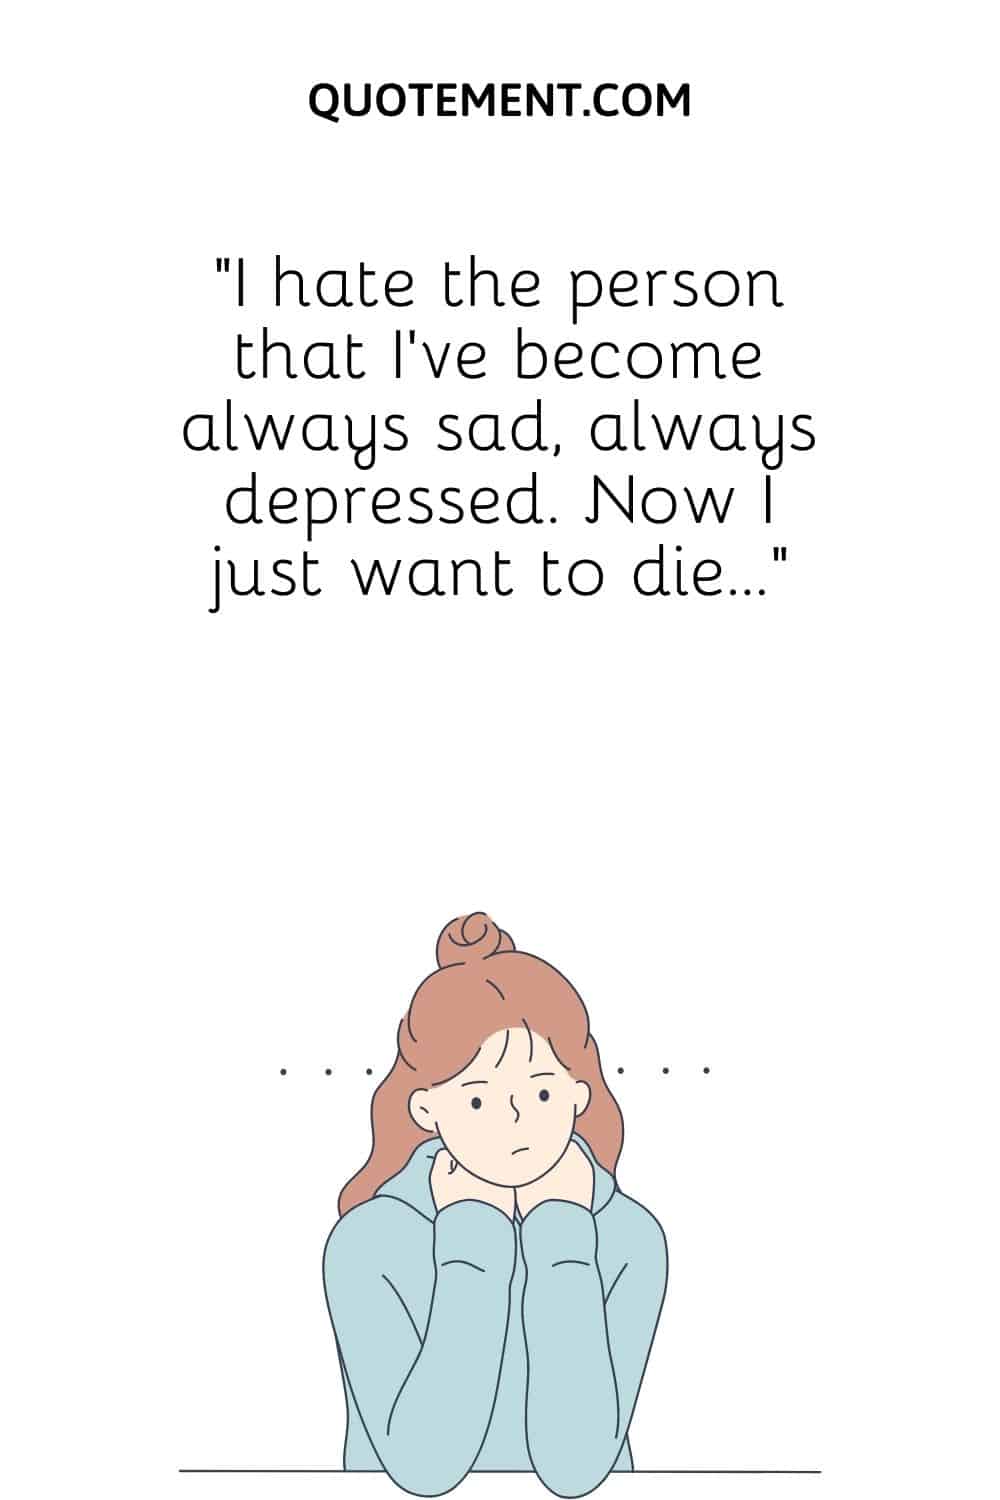 I hate the person that I’ve become always sad